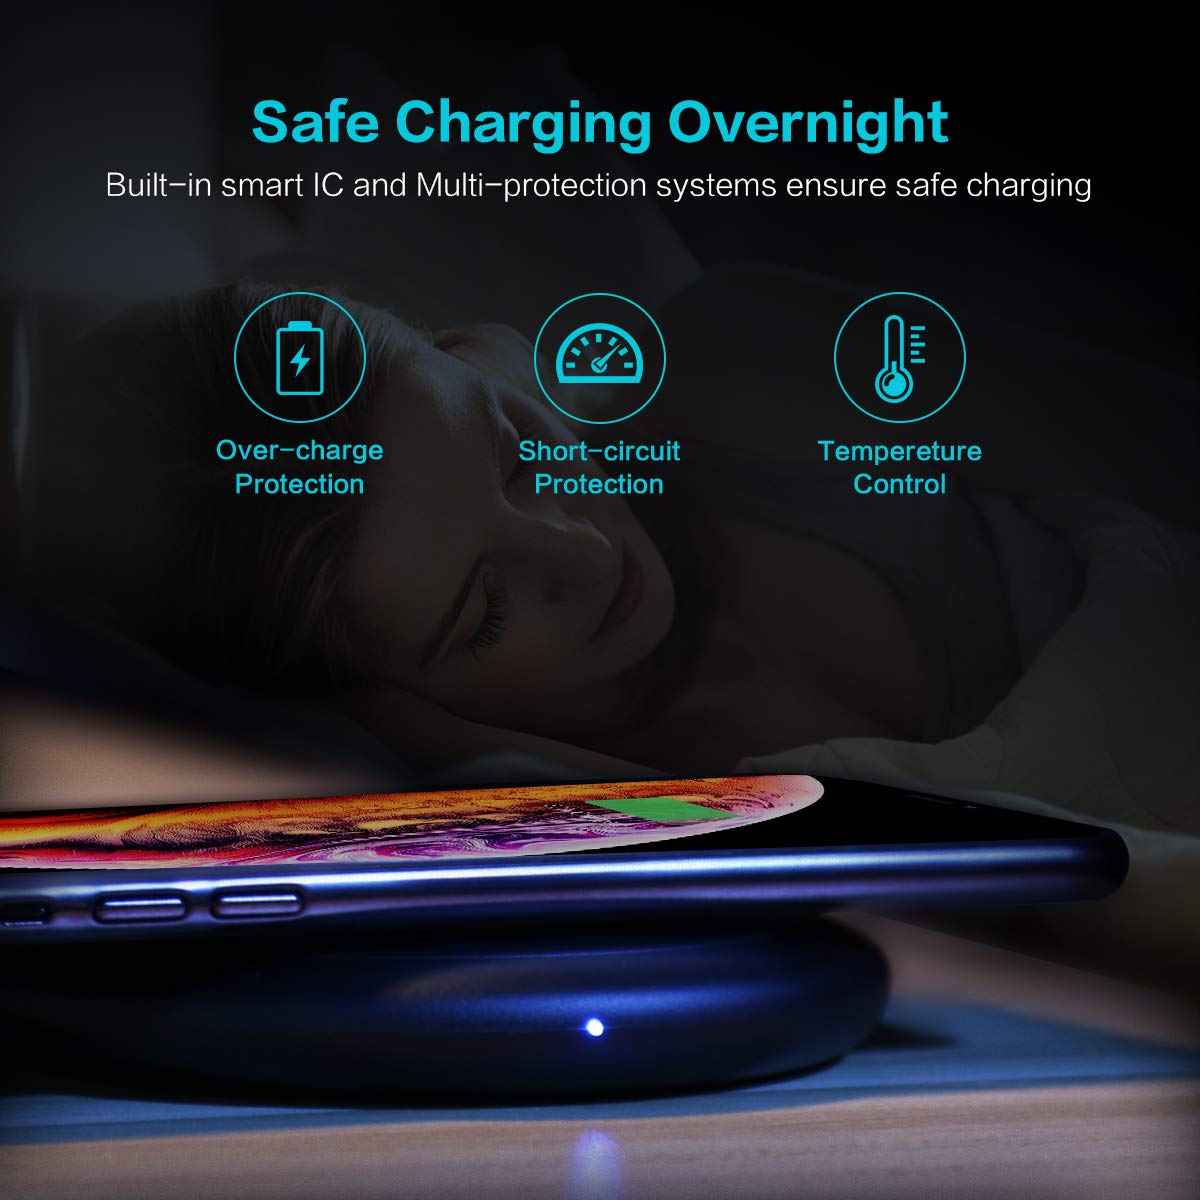 2 in 1 10W Qi Fast Wireless Charger for iWatch for iPhone Xs Max/XR/X/8 Plus/8 Samsung Note 9/8 and More - FLOVEME